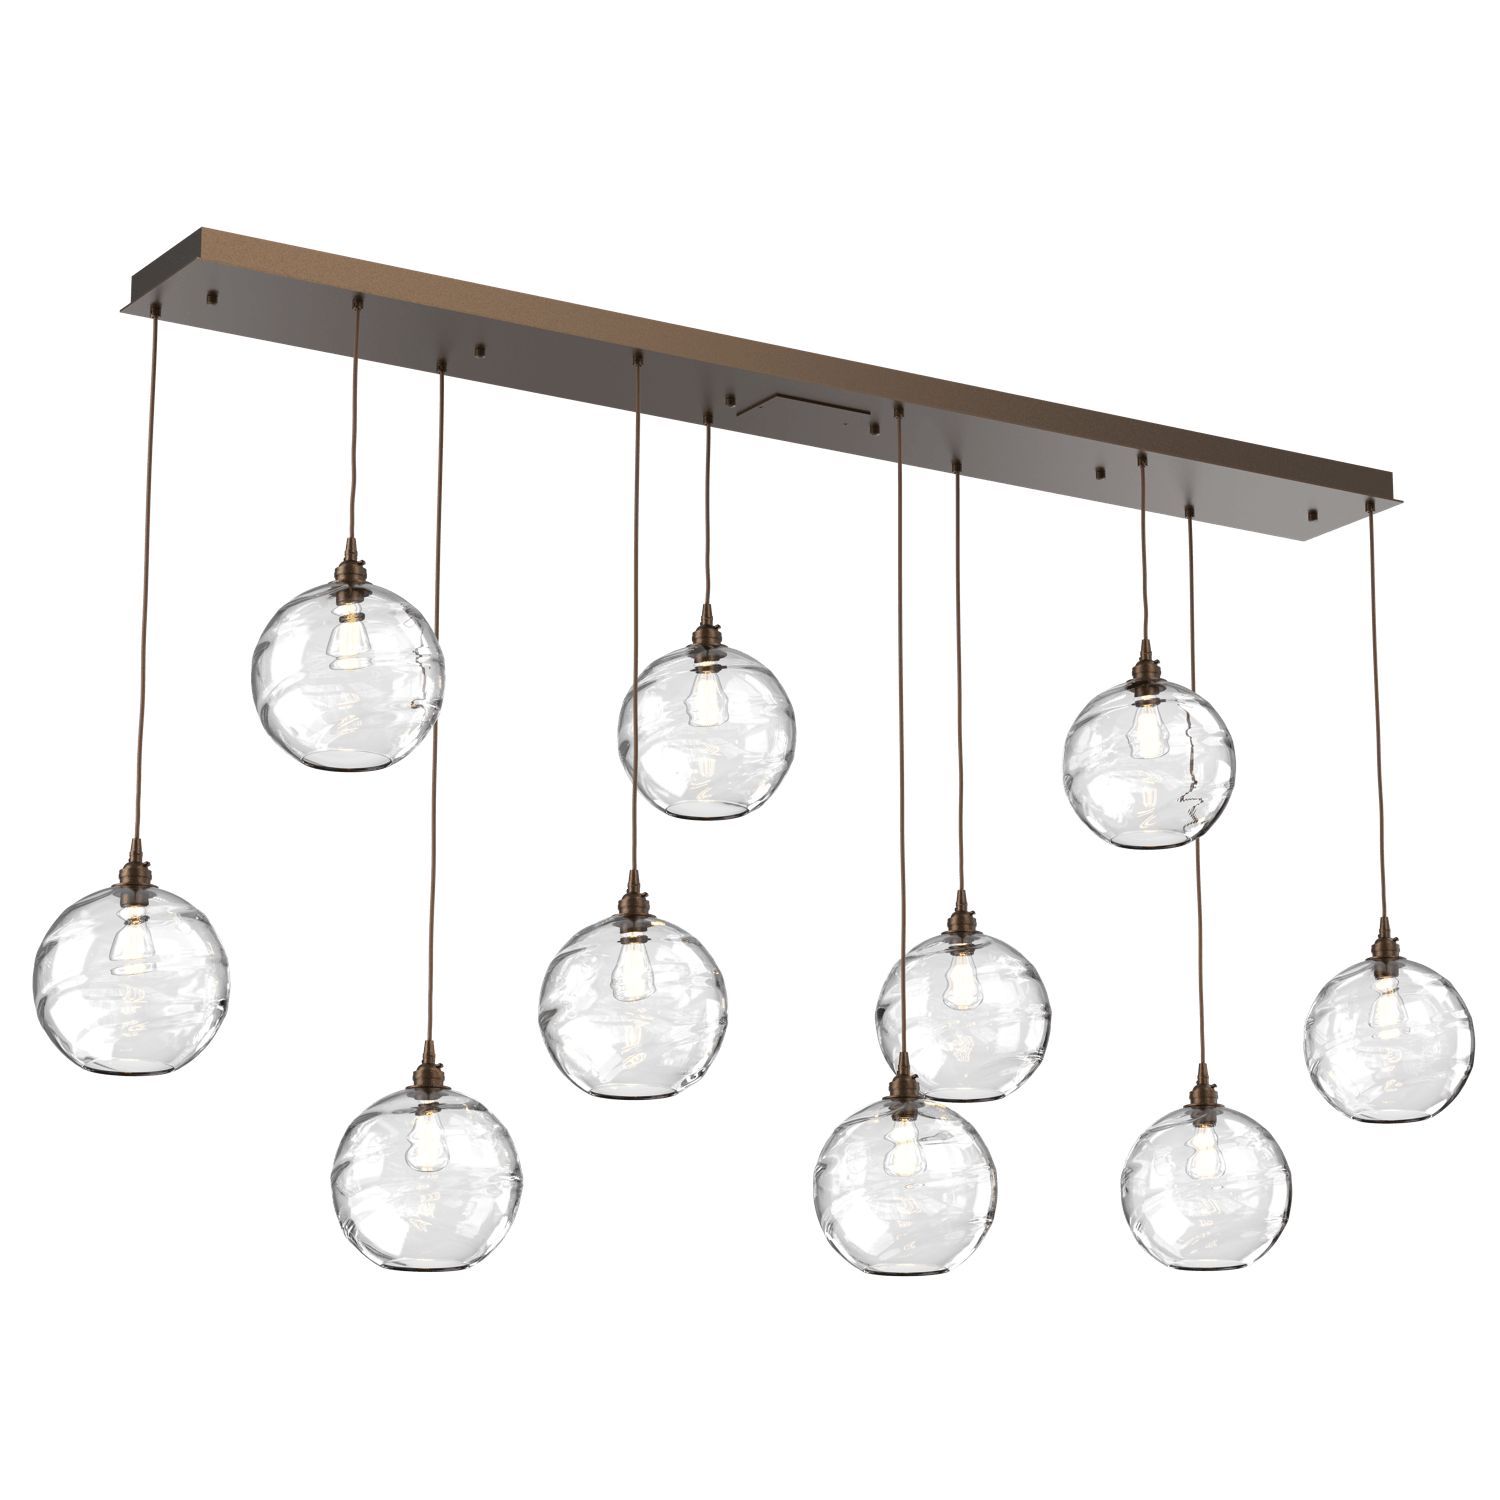 PLB0047-10-FB-OC-Hammerton-Studio-Optic-Blown-Glass-Terra-10-light-linear-pendant-chandelier-with-flat-bronze-finish-and-optic-clear-blown-glass-shades-and-incandescent-lamping